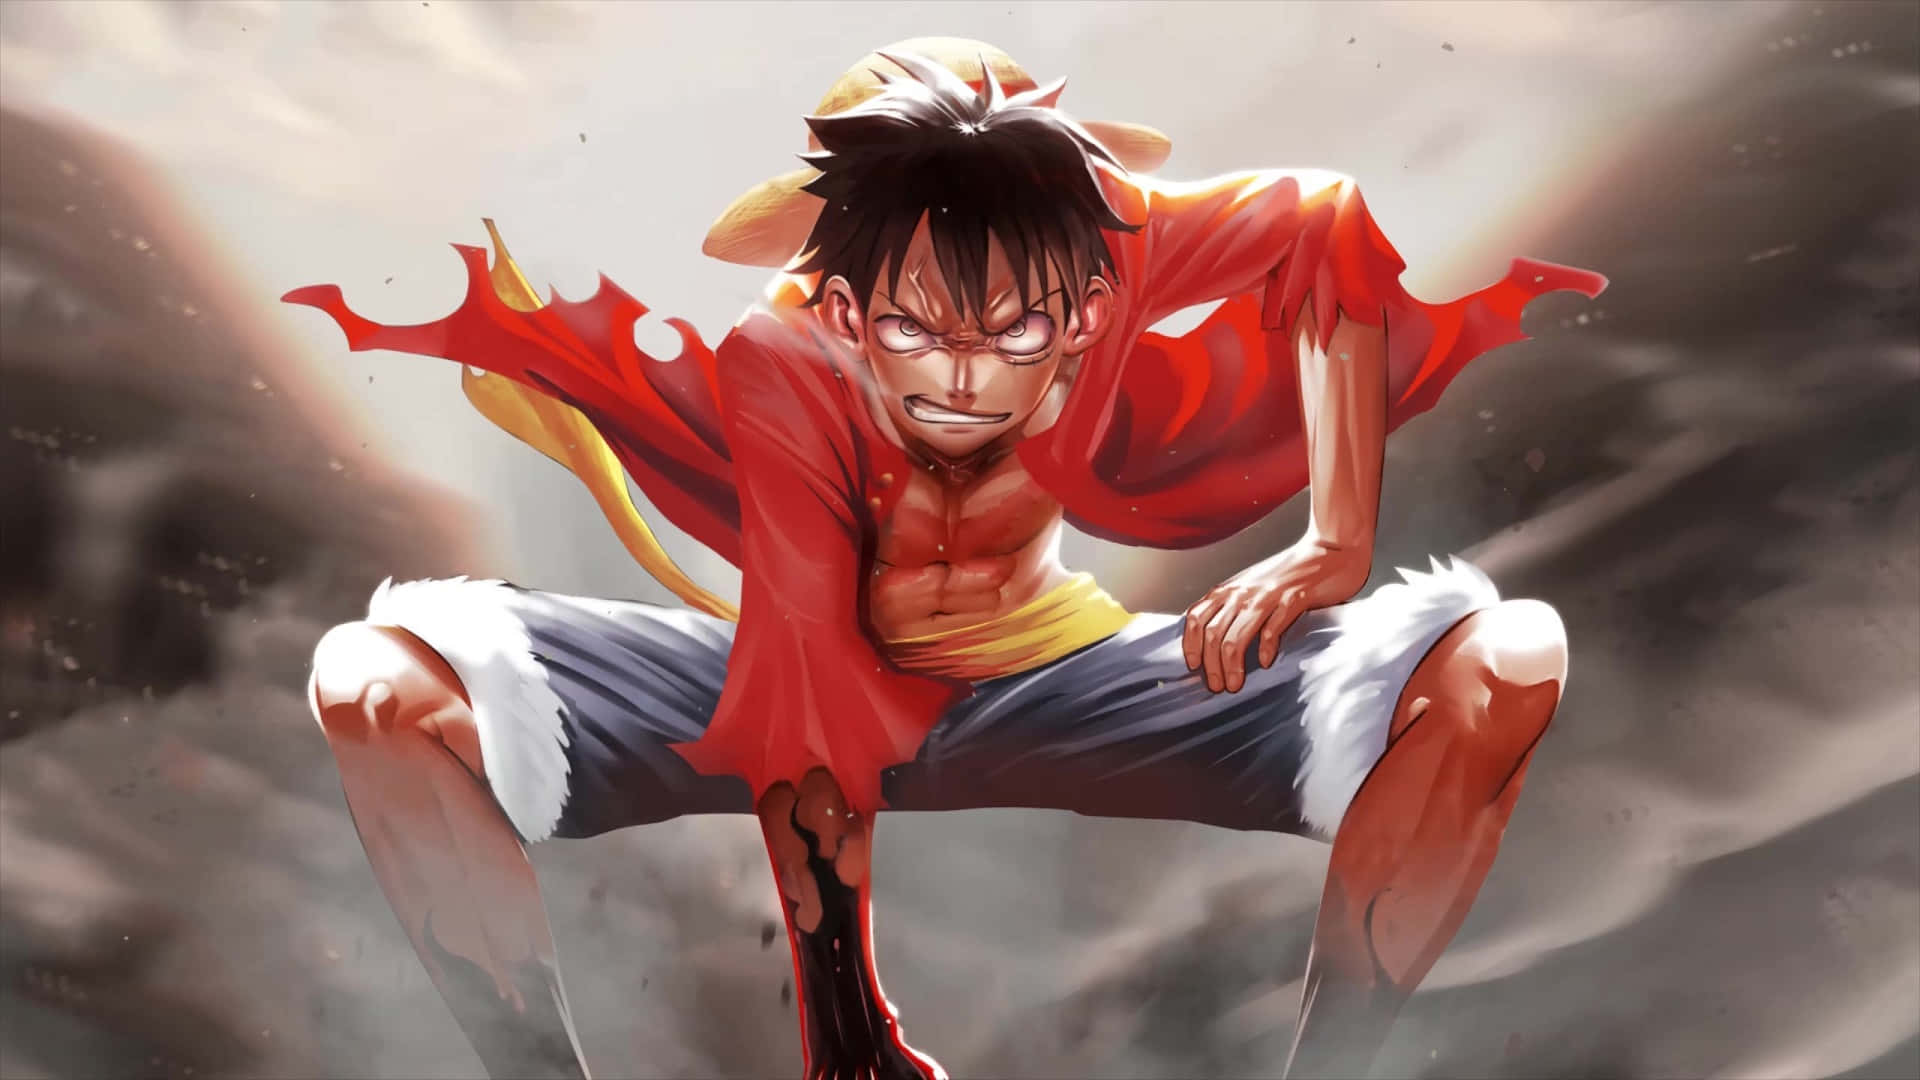 Luffy Gear 3 Wallpapers - Wallpaper Cave